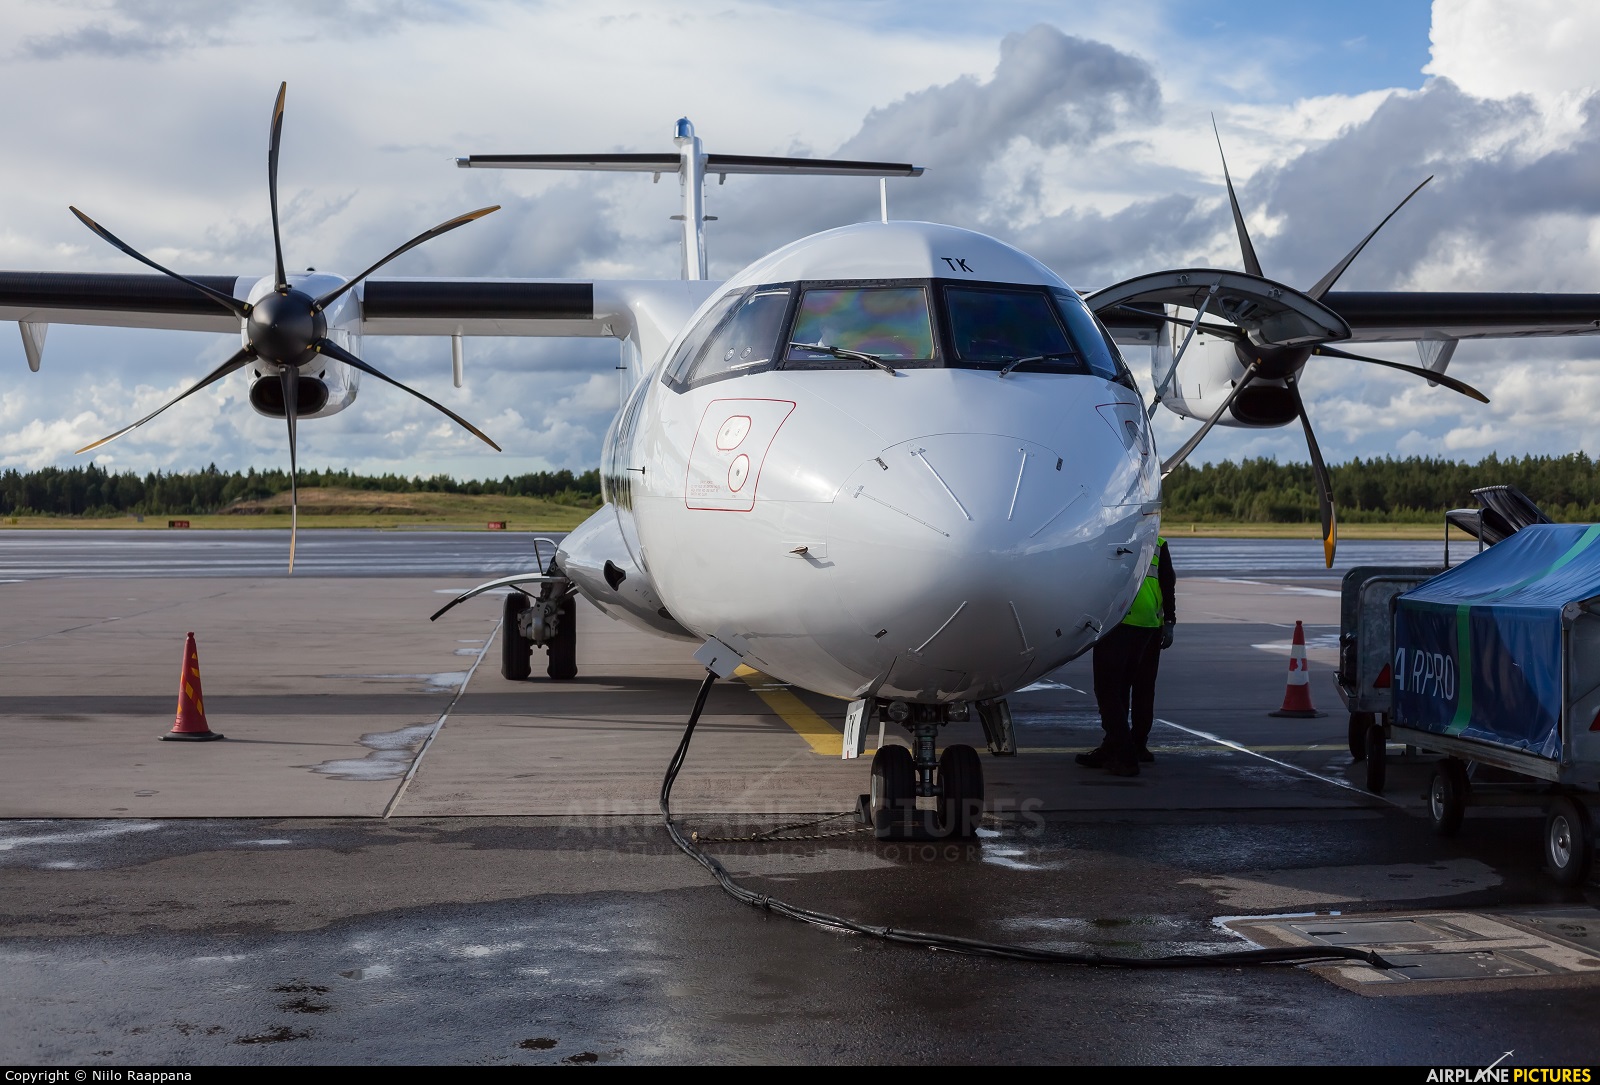 NoRRA - Nordic Regional Airlines OH-ATK aircraft at Turku